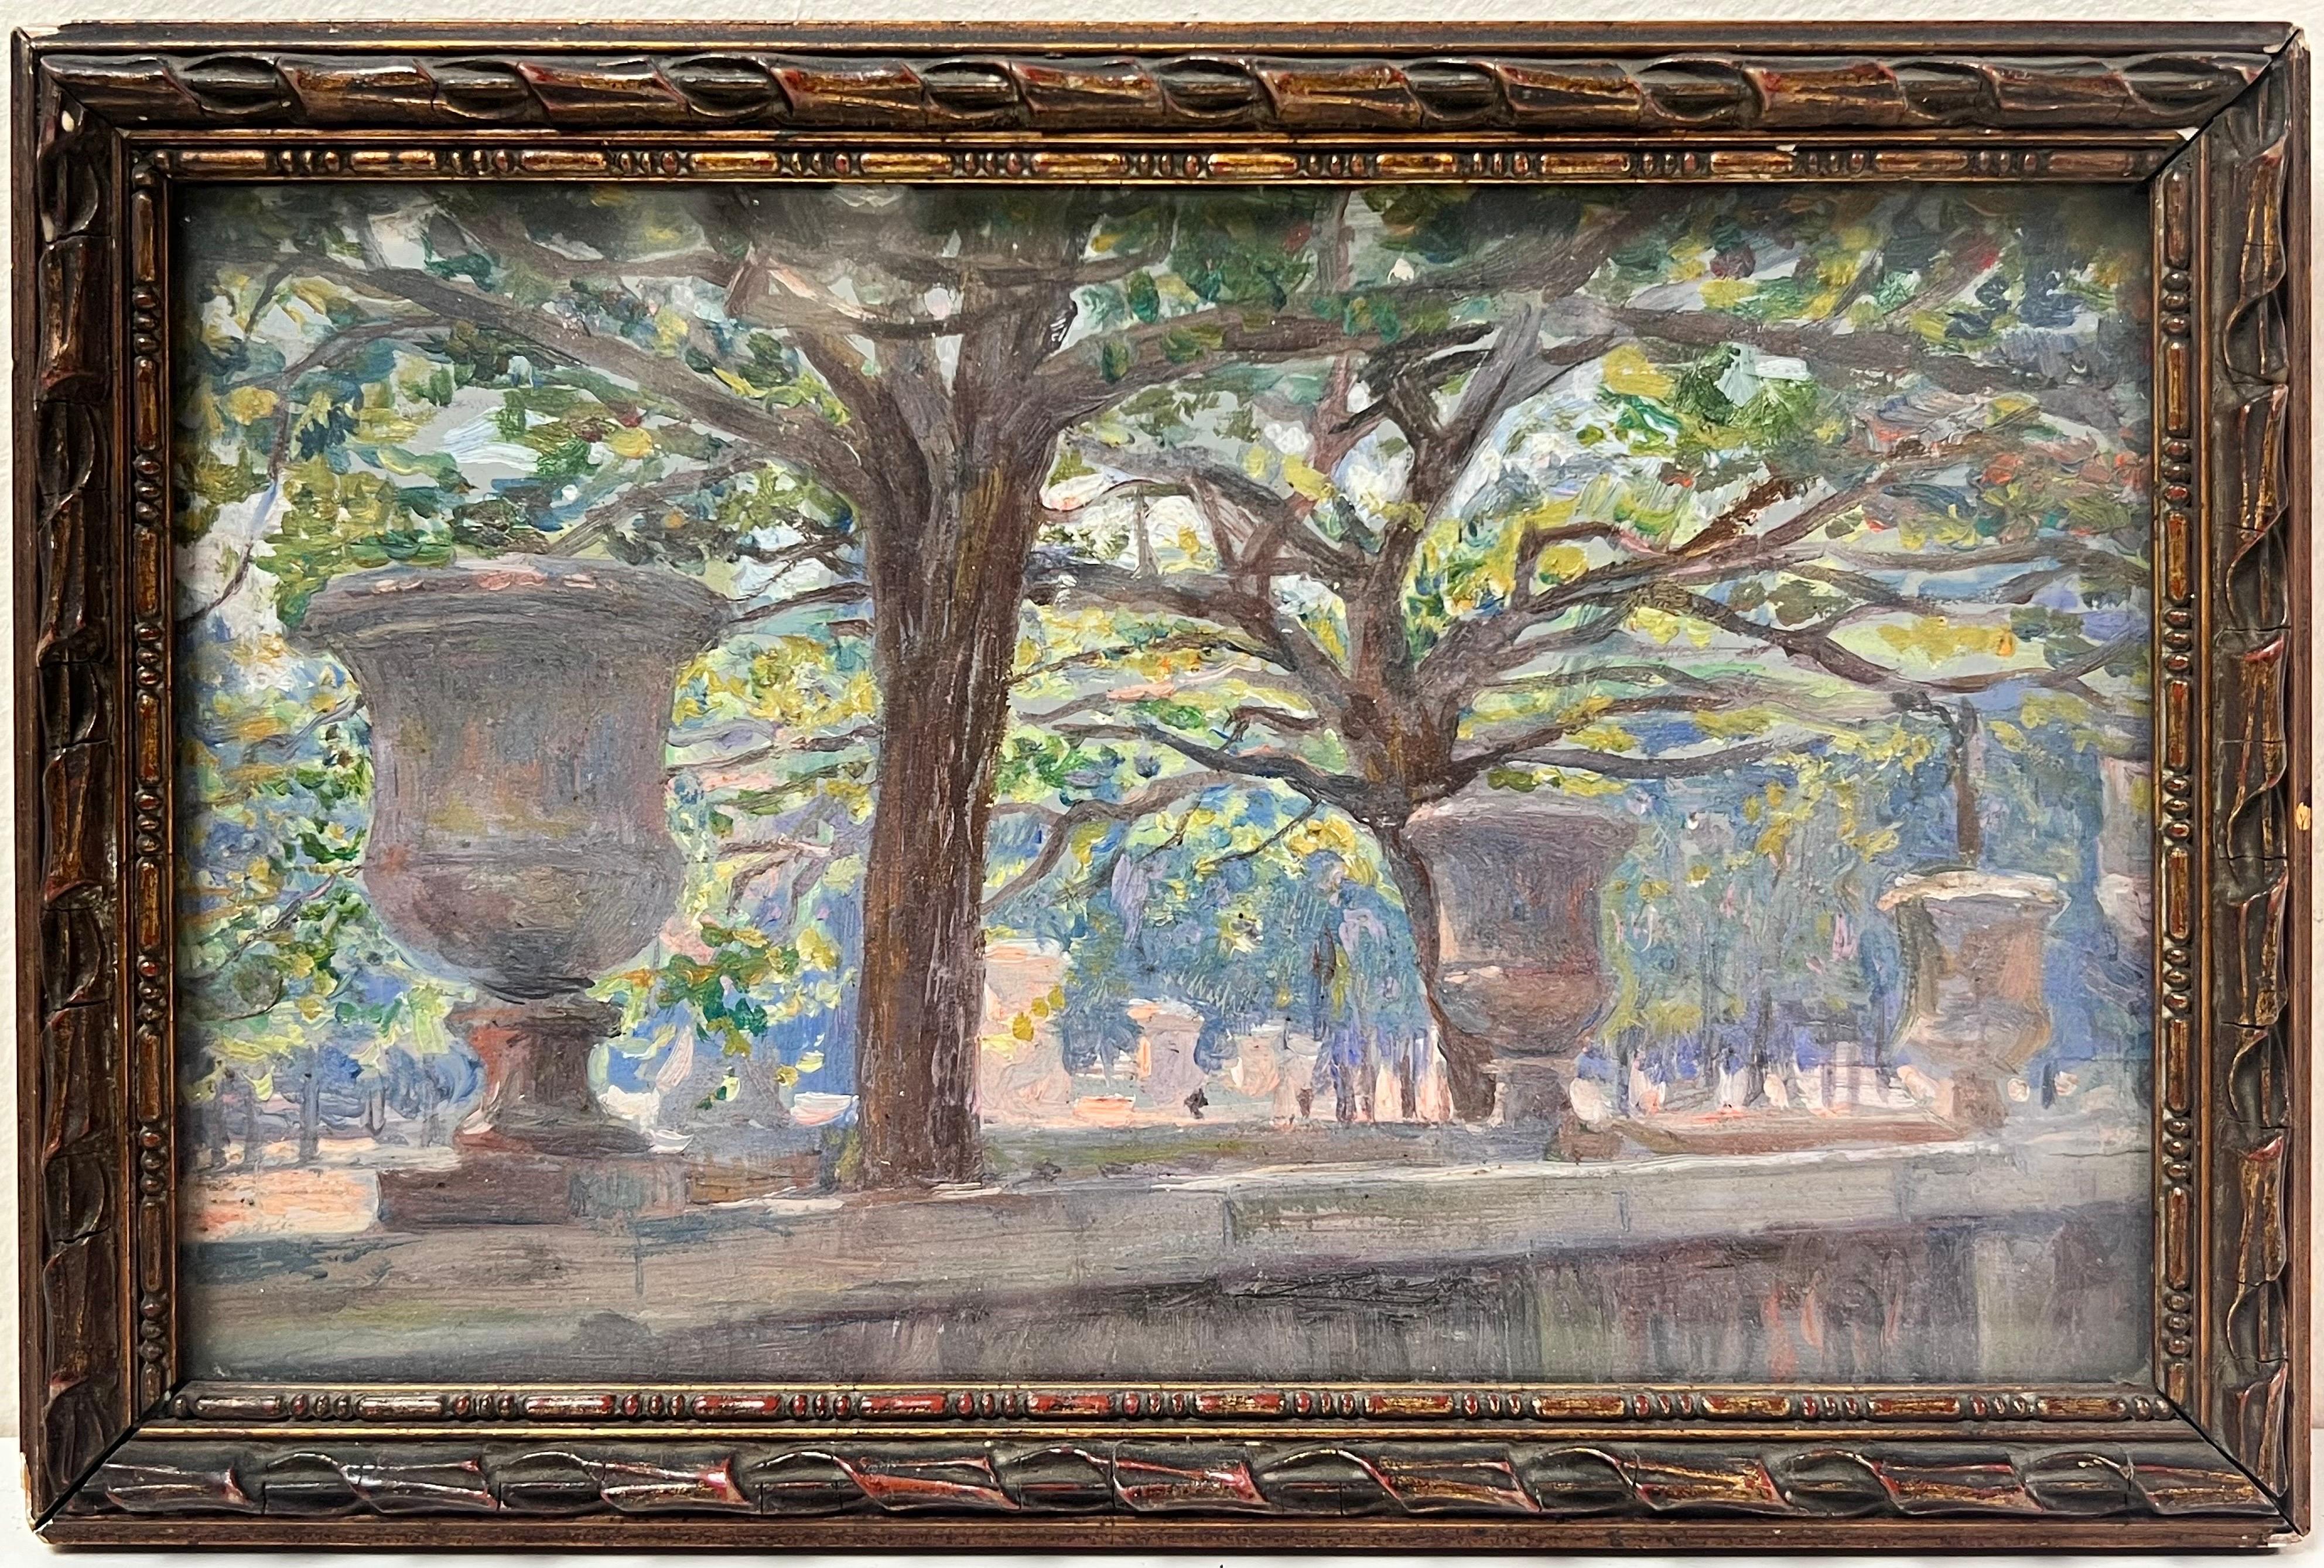 Versailles
French School, early/ mid 20th century
oil on board with glass over, framed
framed: 7 x 10 inches
board: 6 x 9 inches
provenance: private collection, France
condition: very good and sound condition  